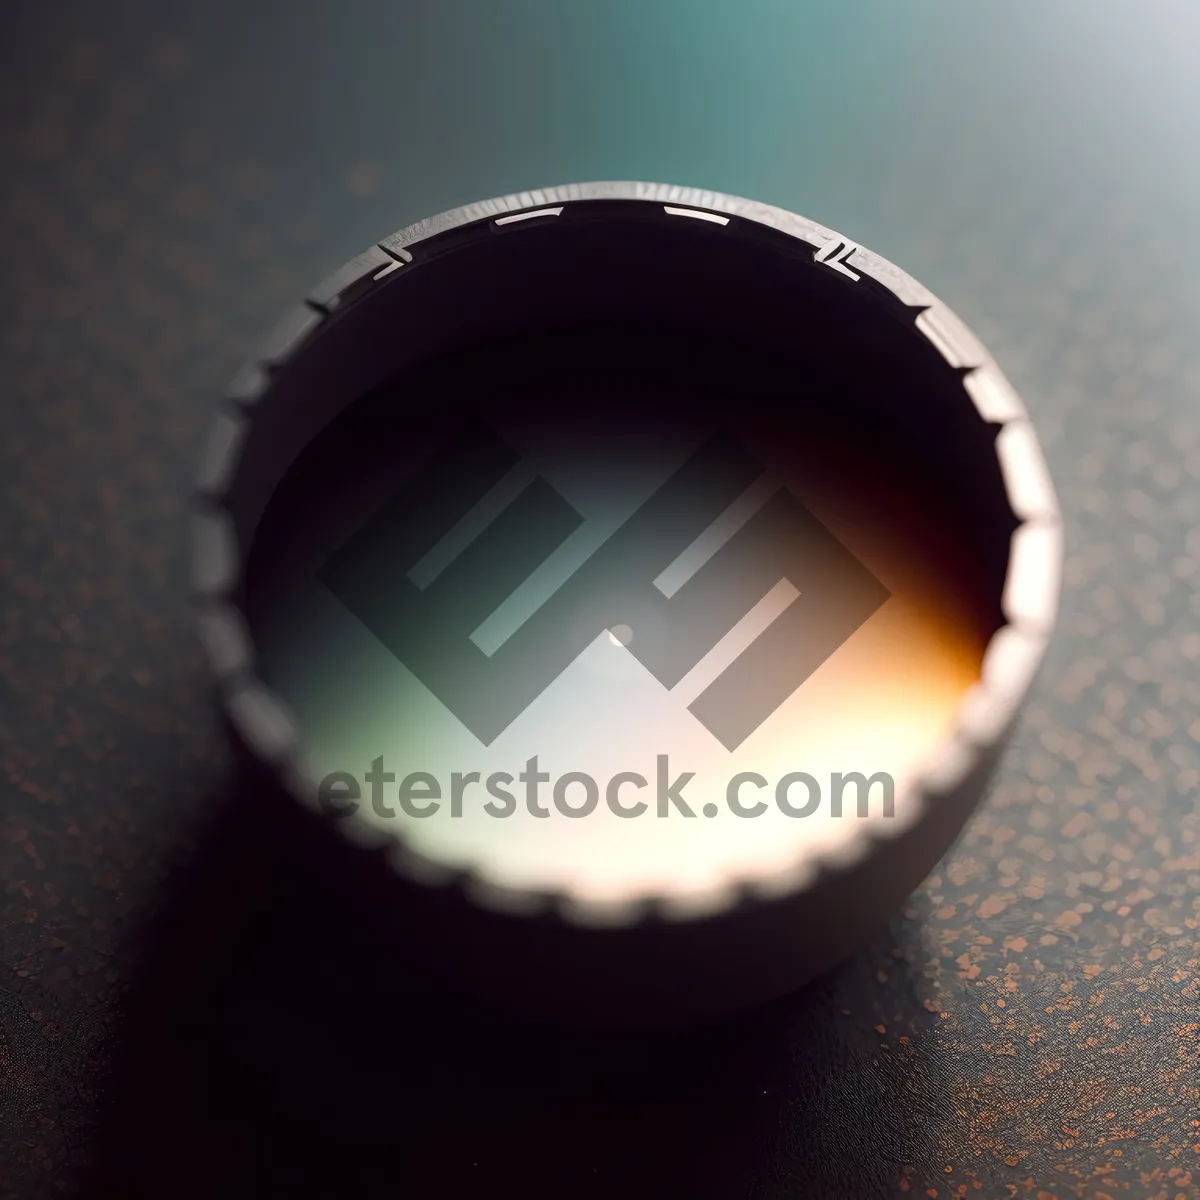 Picture of Black Cup of Hot Beverage with Hand Covering